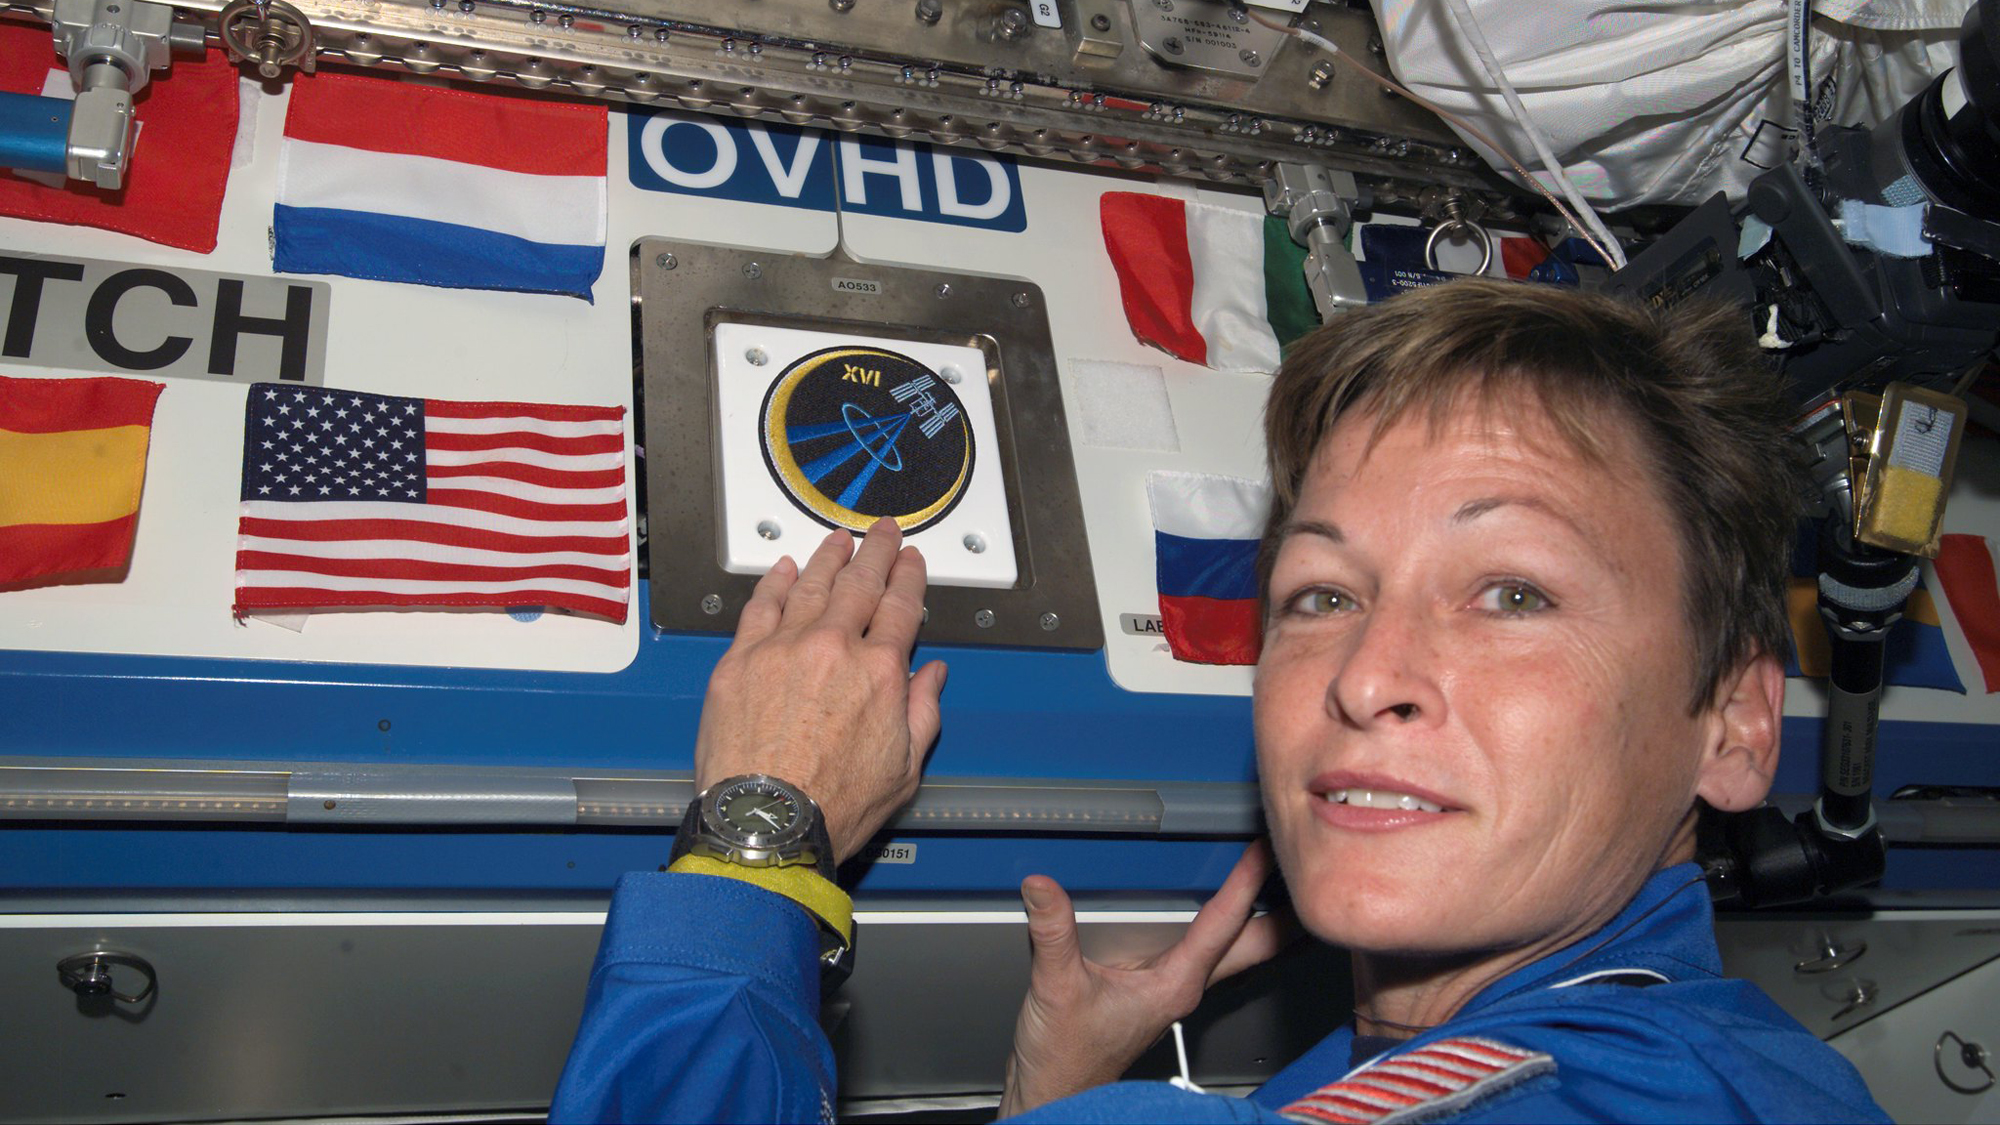 Veteran NASA astronaut Peggy Whitson places her mission patch on the International Space Station during the Expedition 16 mission.